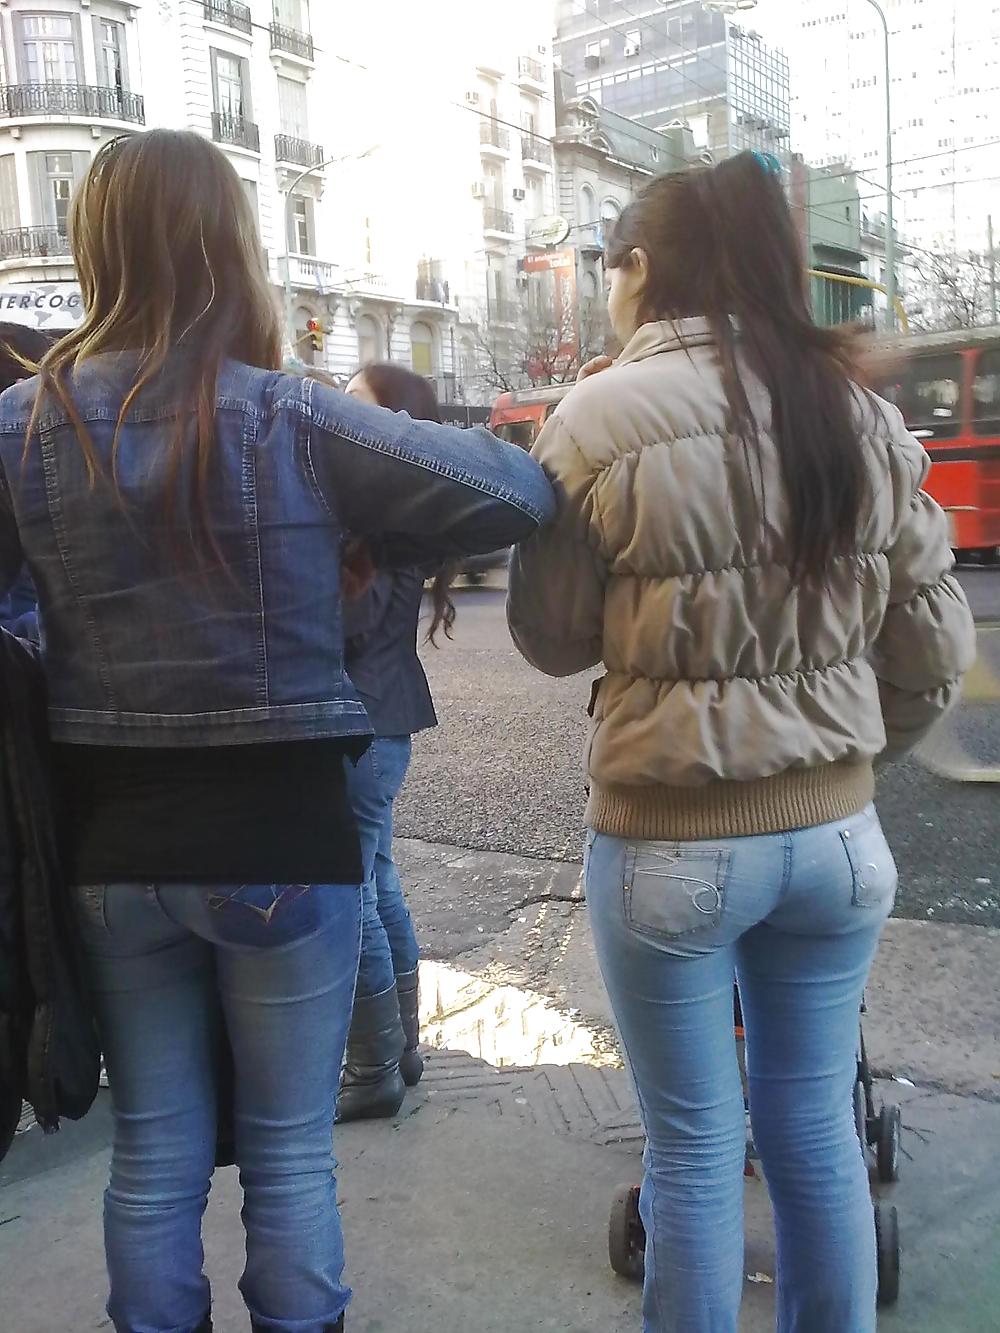 Asses in jeans #2 #4267332